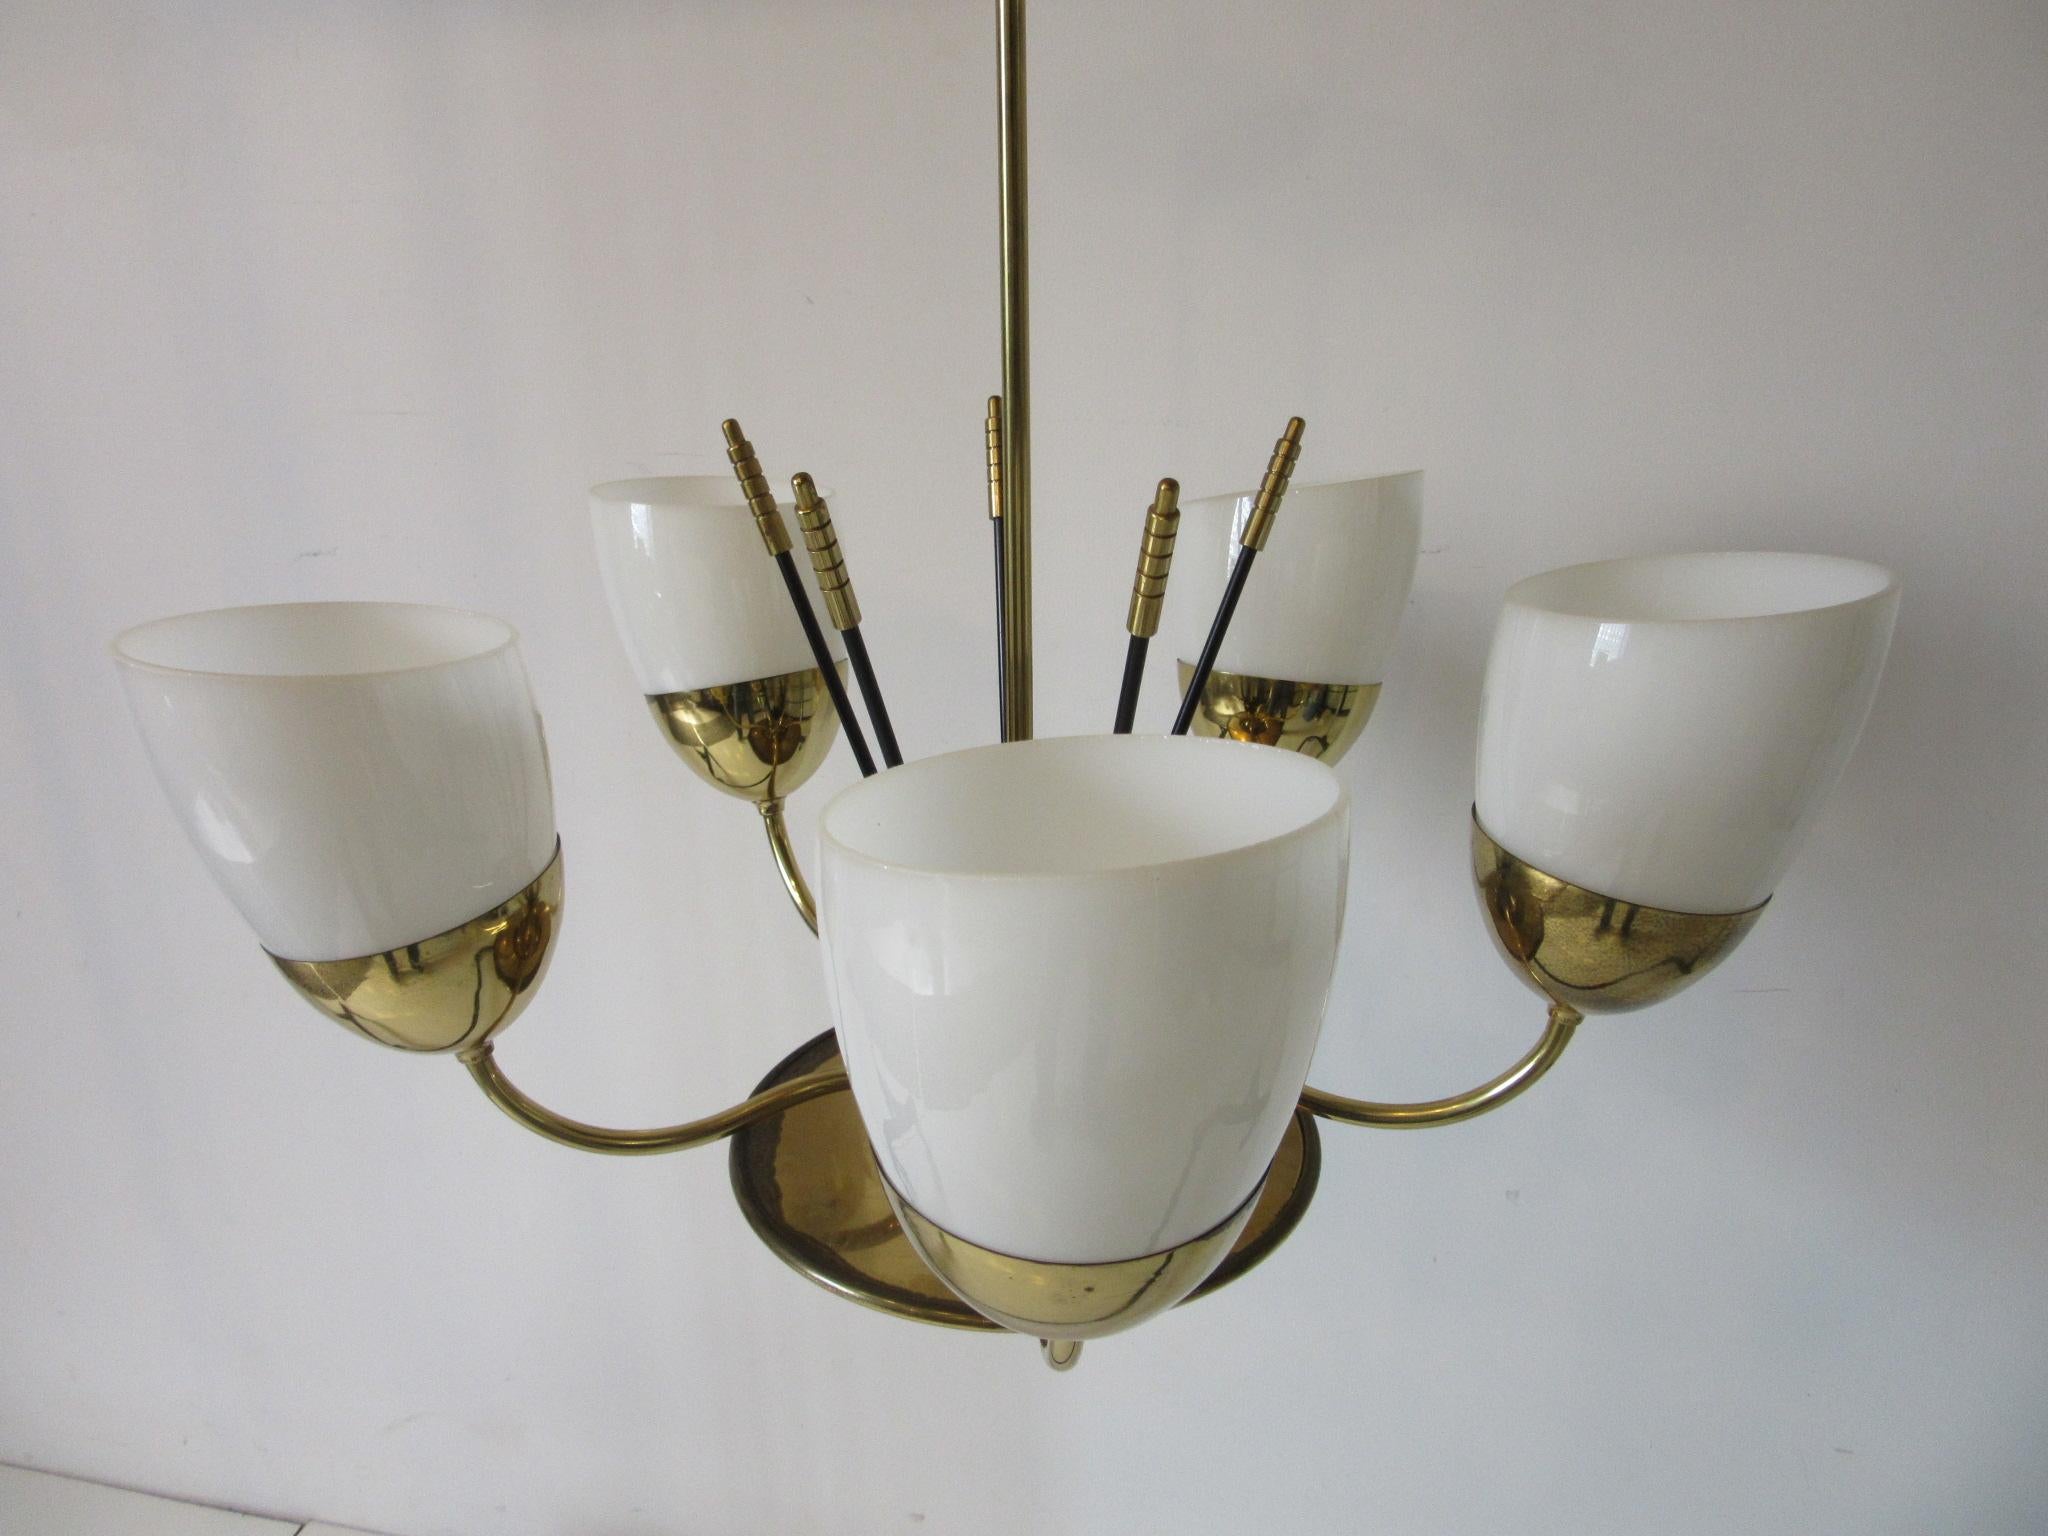 American Brass and Glass Chandelier by Majestic in the Style of Arredoluce